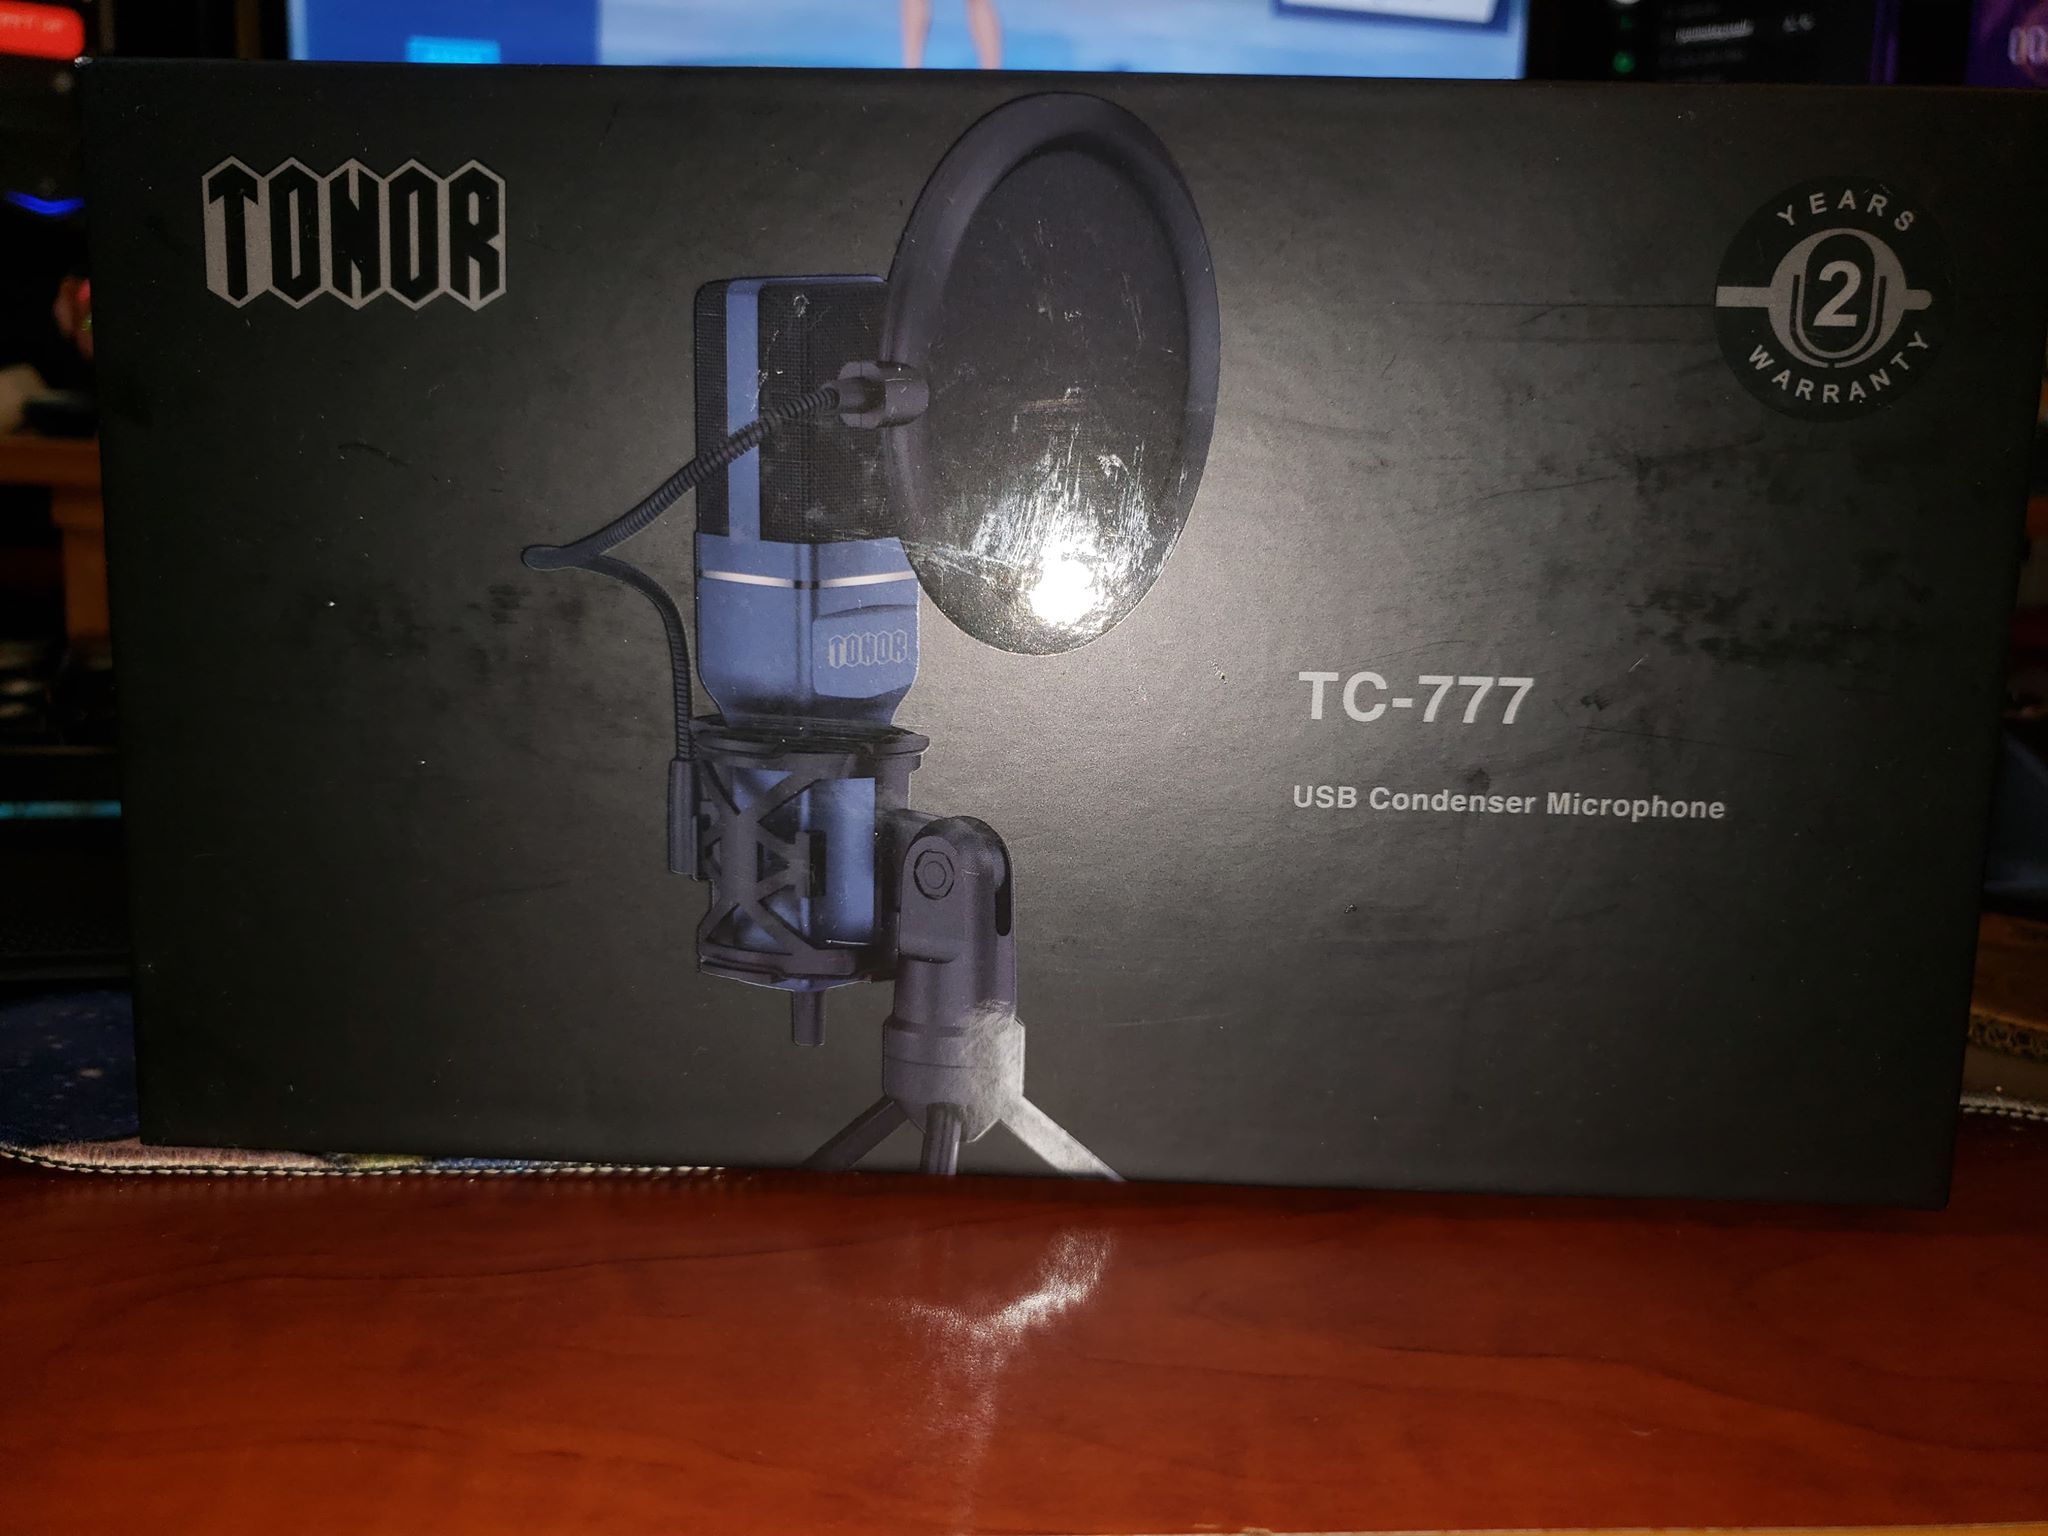 Review of The Tonor TC-777 USB Microphone